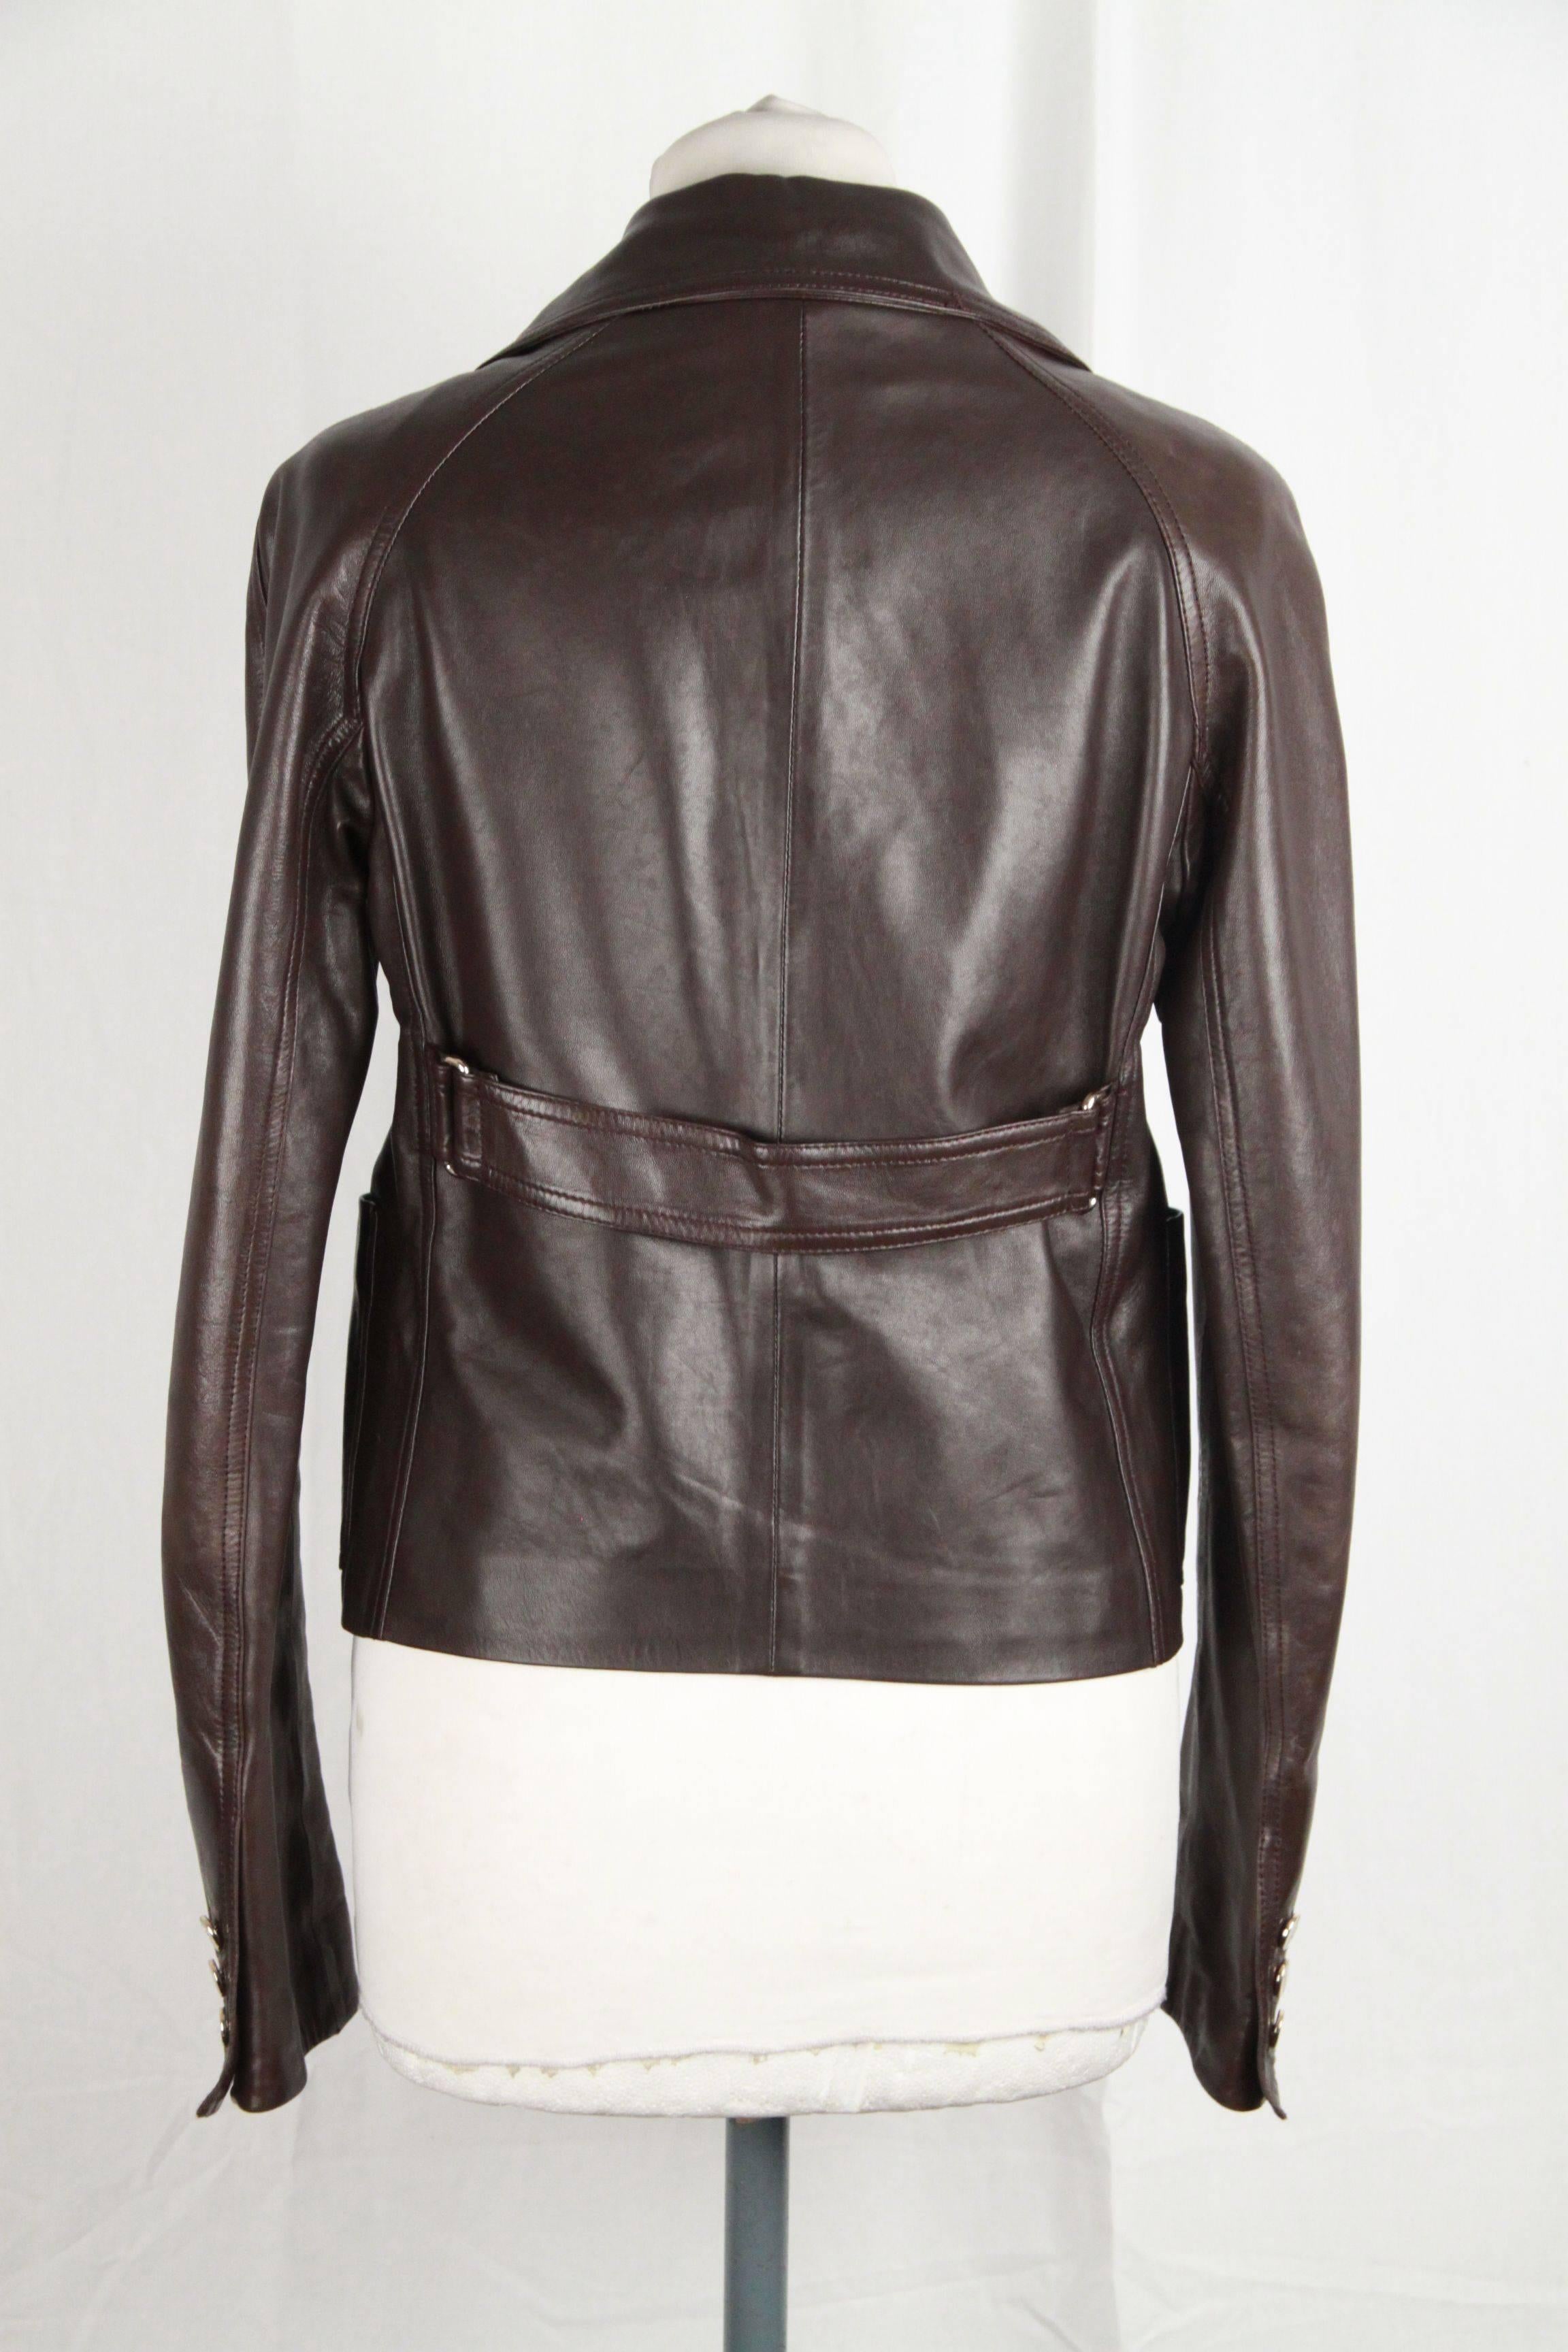 Women's or Men's GUCCI Brown Leather DOUBLE BREASTED JACKET Size 40